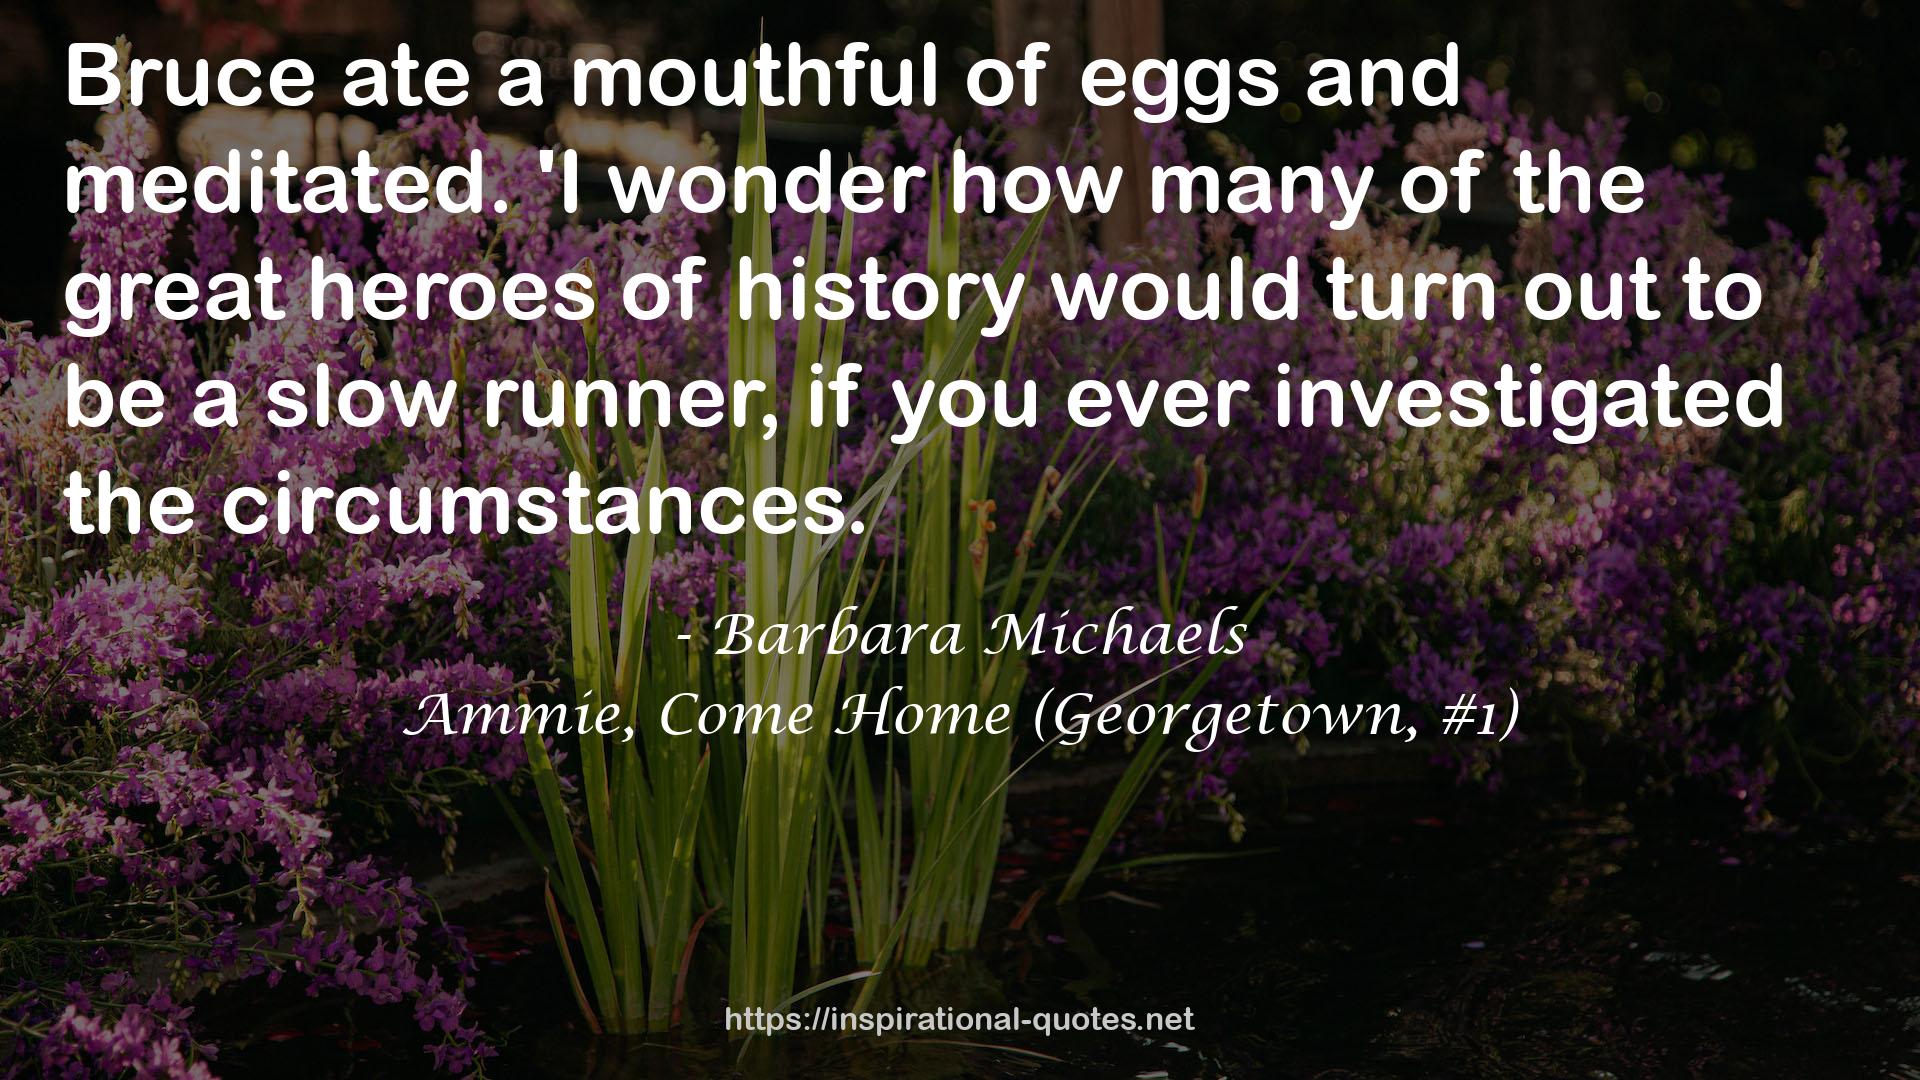 Ammie, Come Home (Georgetown, #1) QUOTES